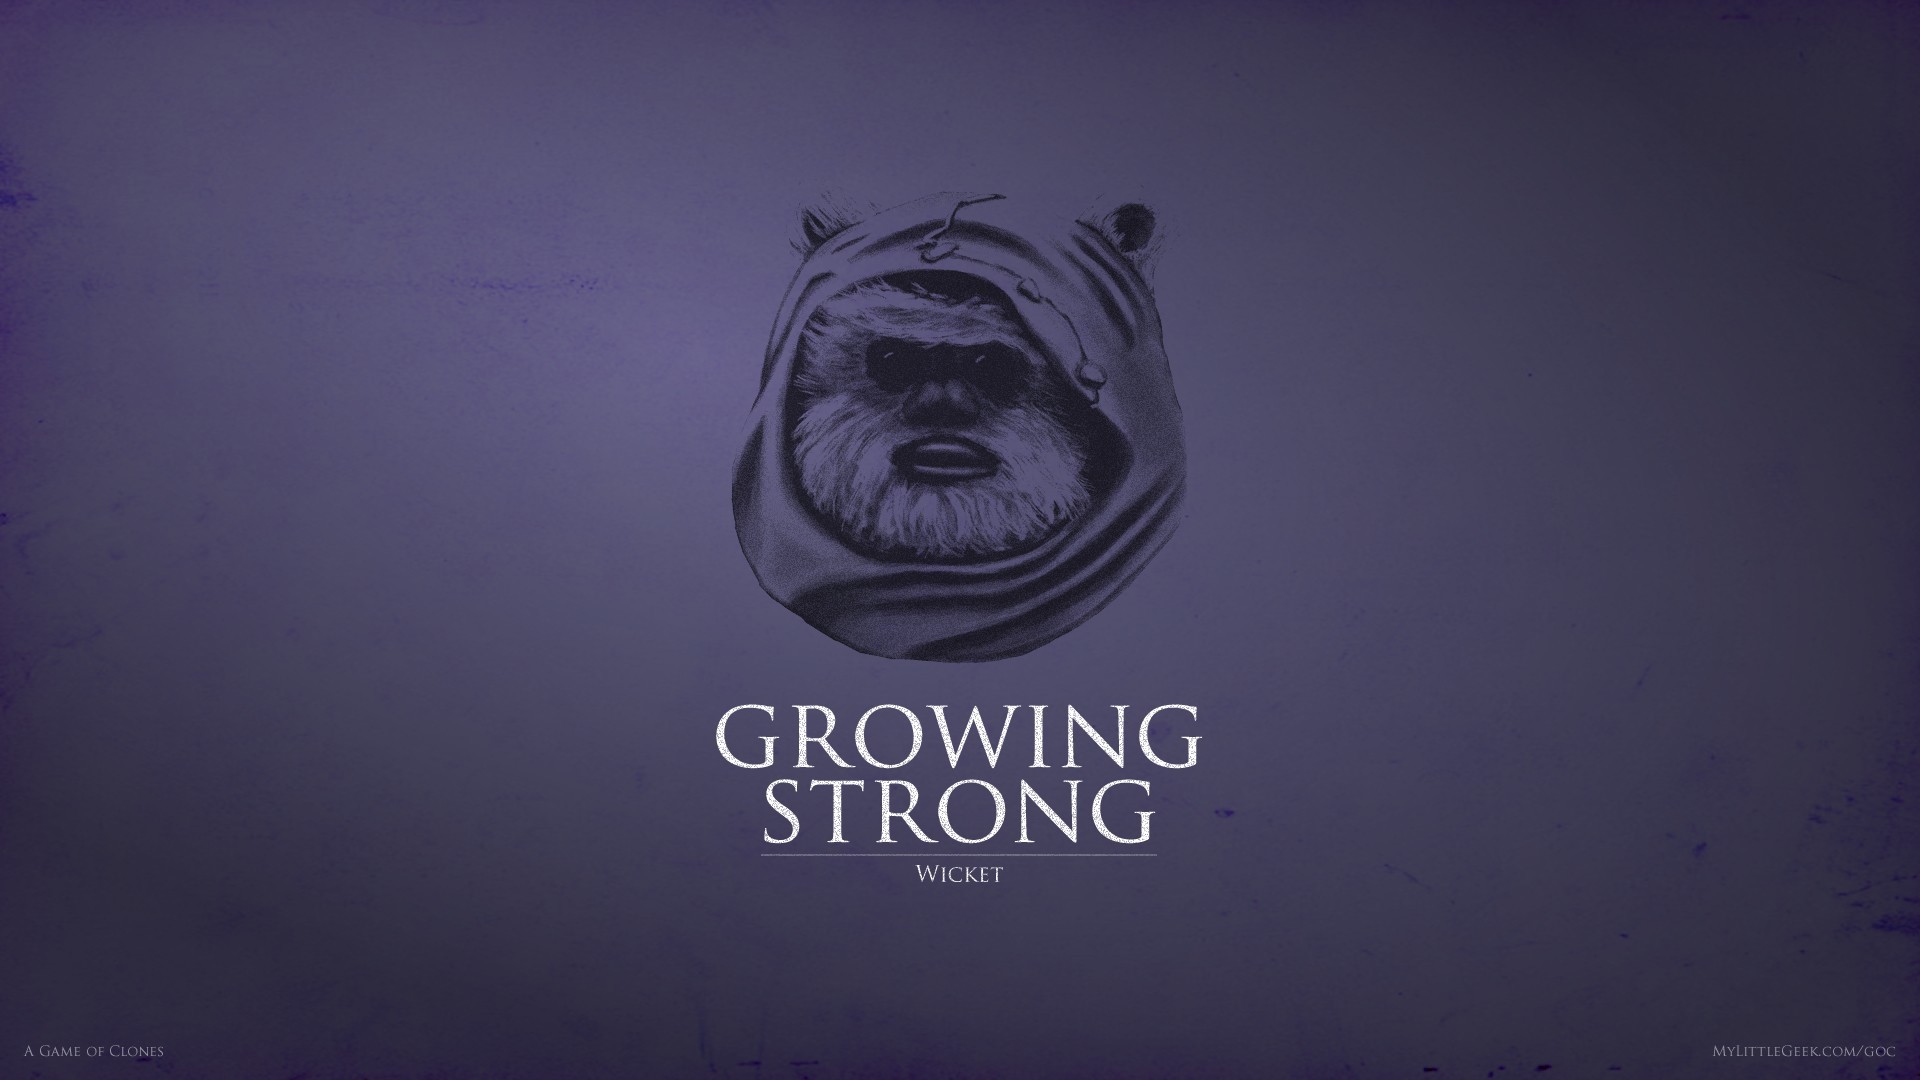 1920x1080 Growing Strong: Wicket the Ewok